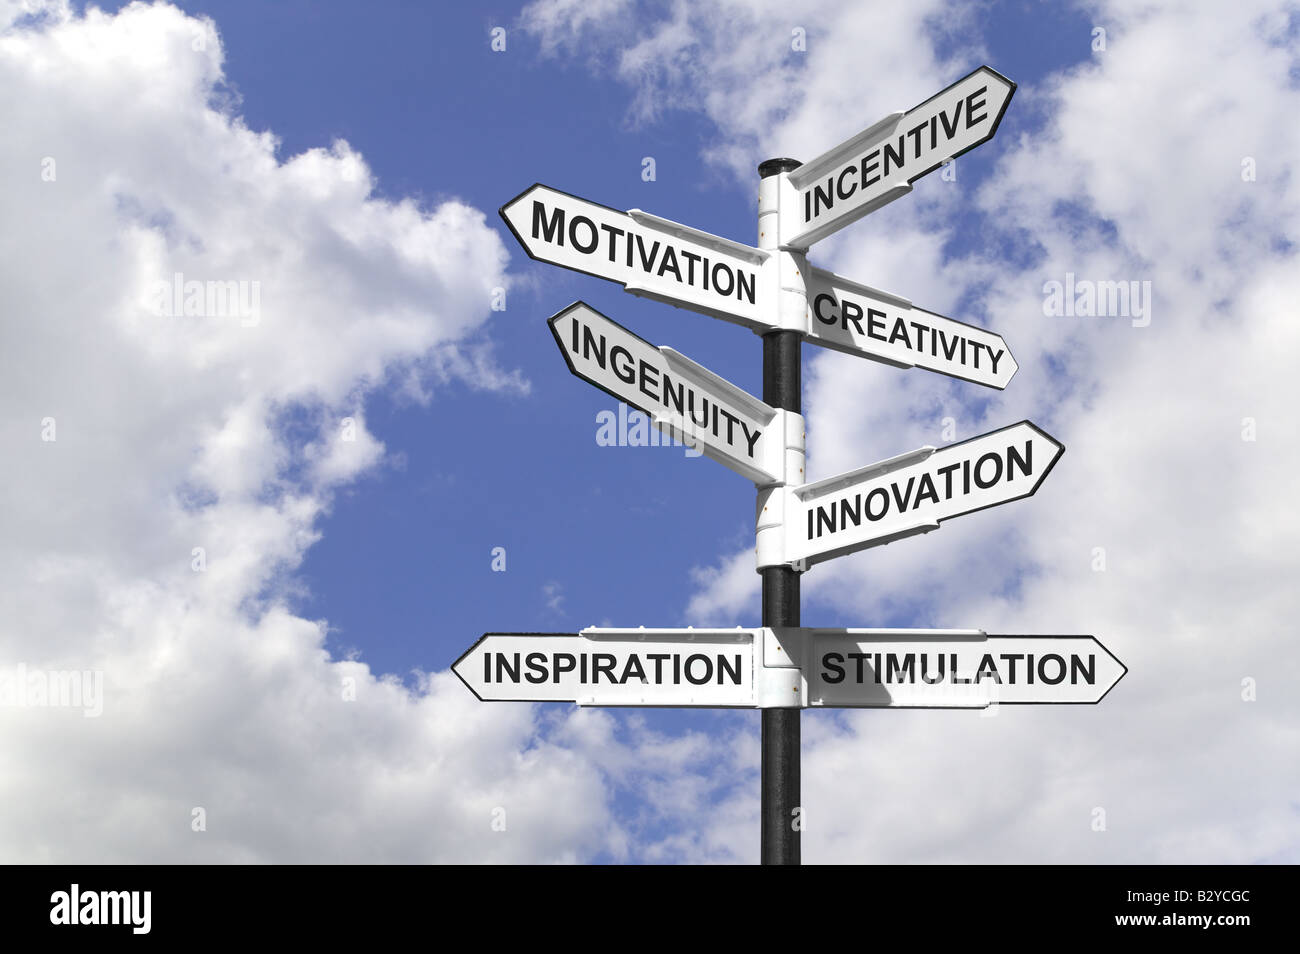 Concept image of a signpost with motivational directions Stock Photo